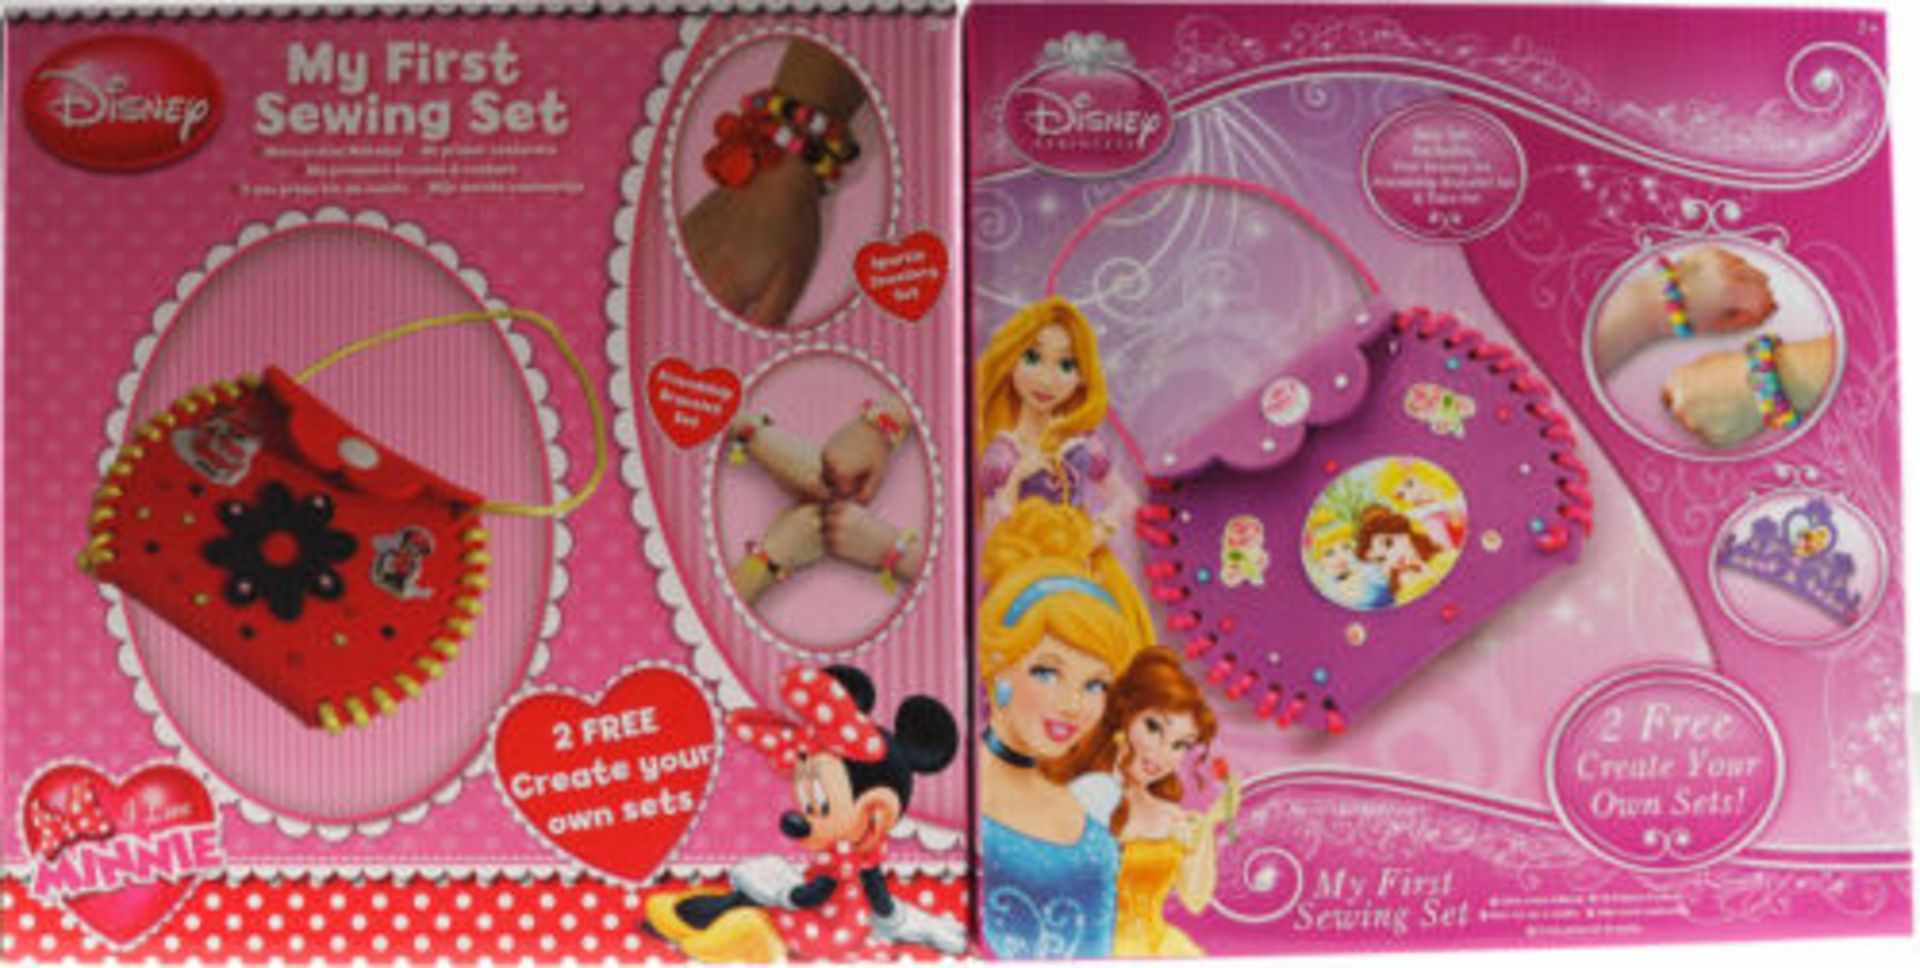 12 x Set Of 2 My First Sewing Craft Kits - Disney Princess & Minnie Mouse so 24 total